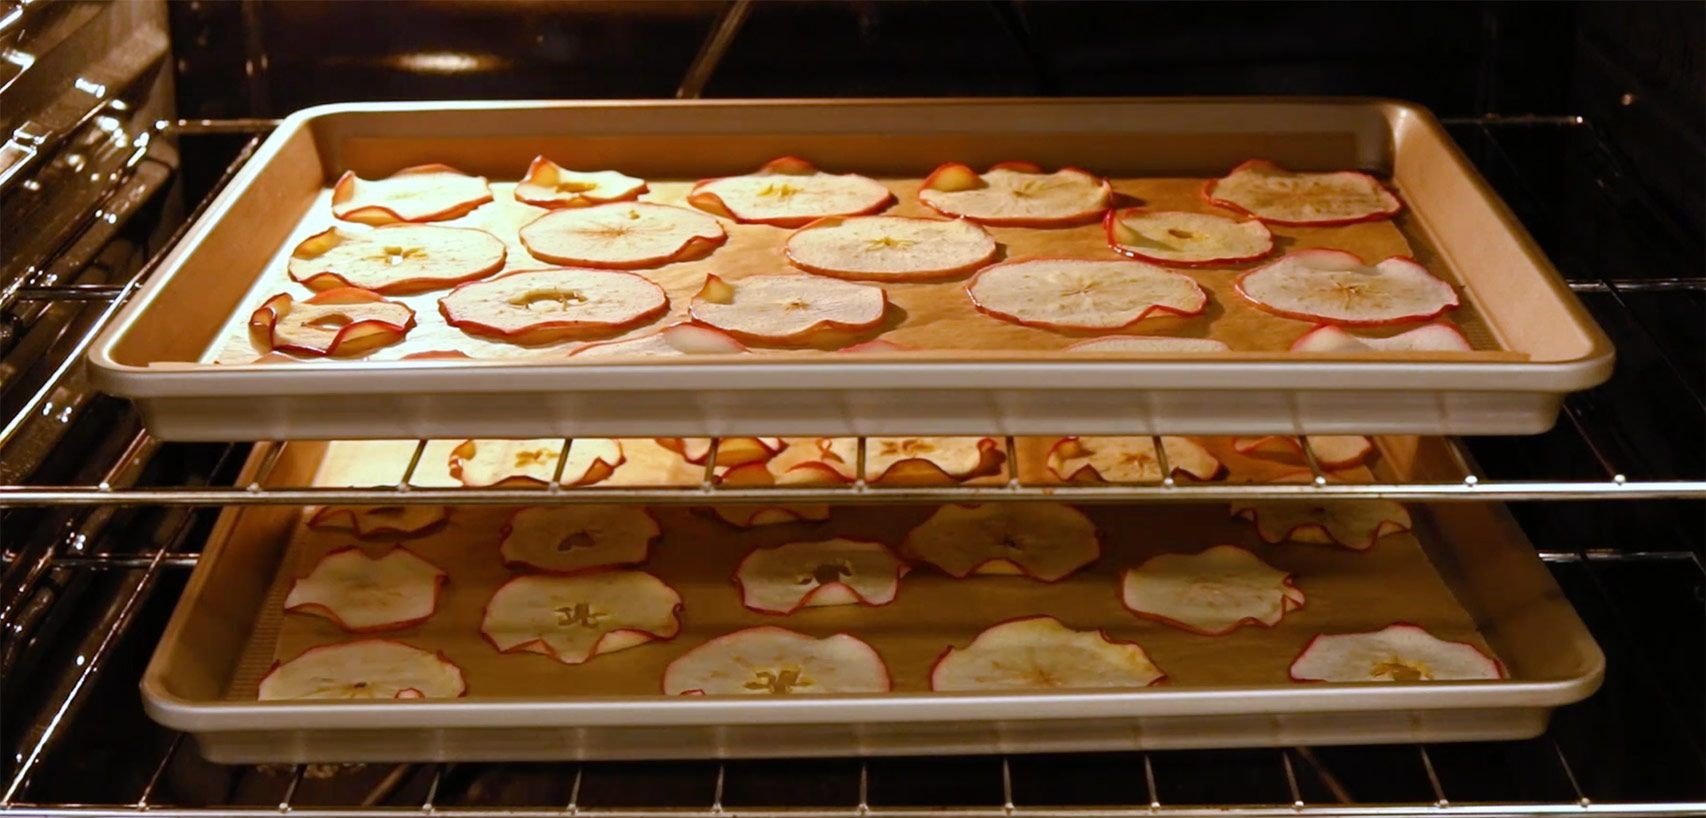 How To Use Oven As A Dehydrator